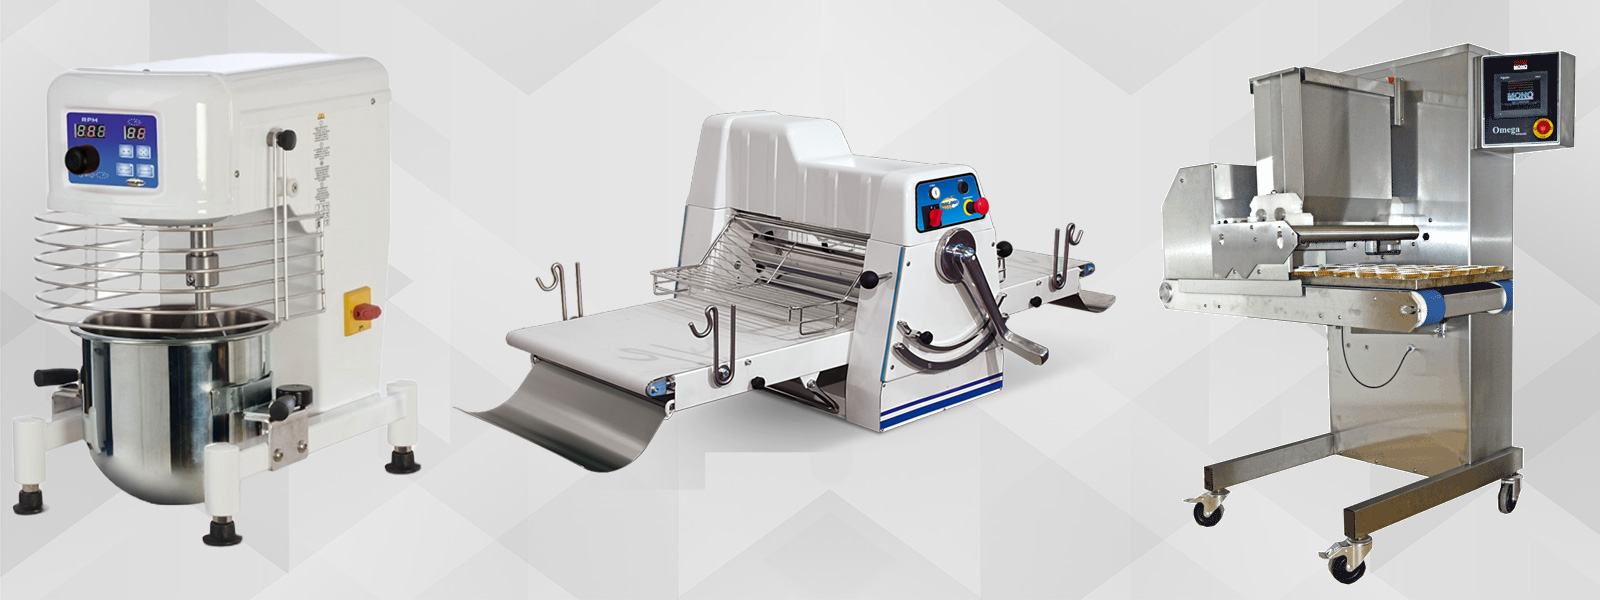 Bakery & Confectionery Equipment